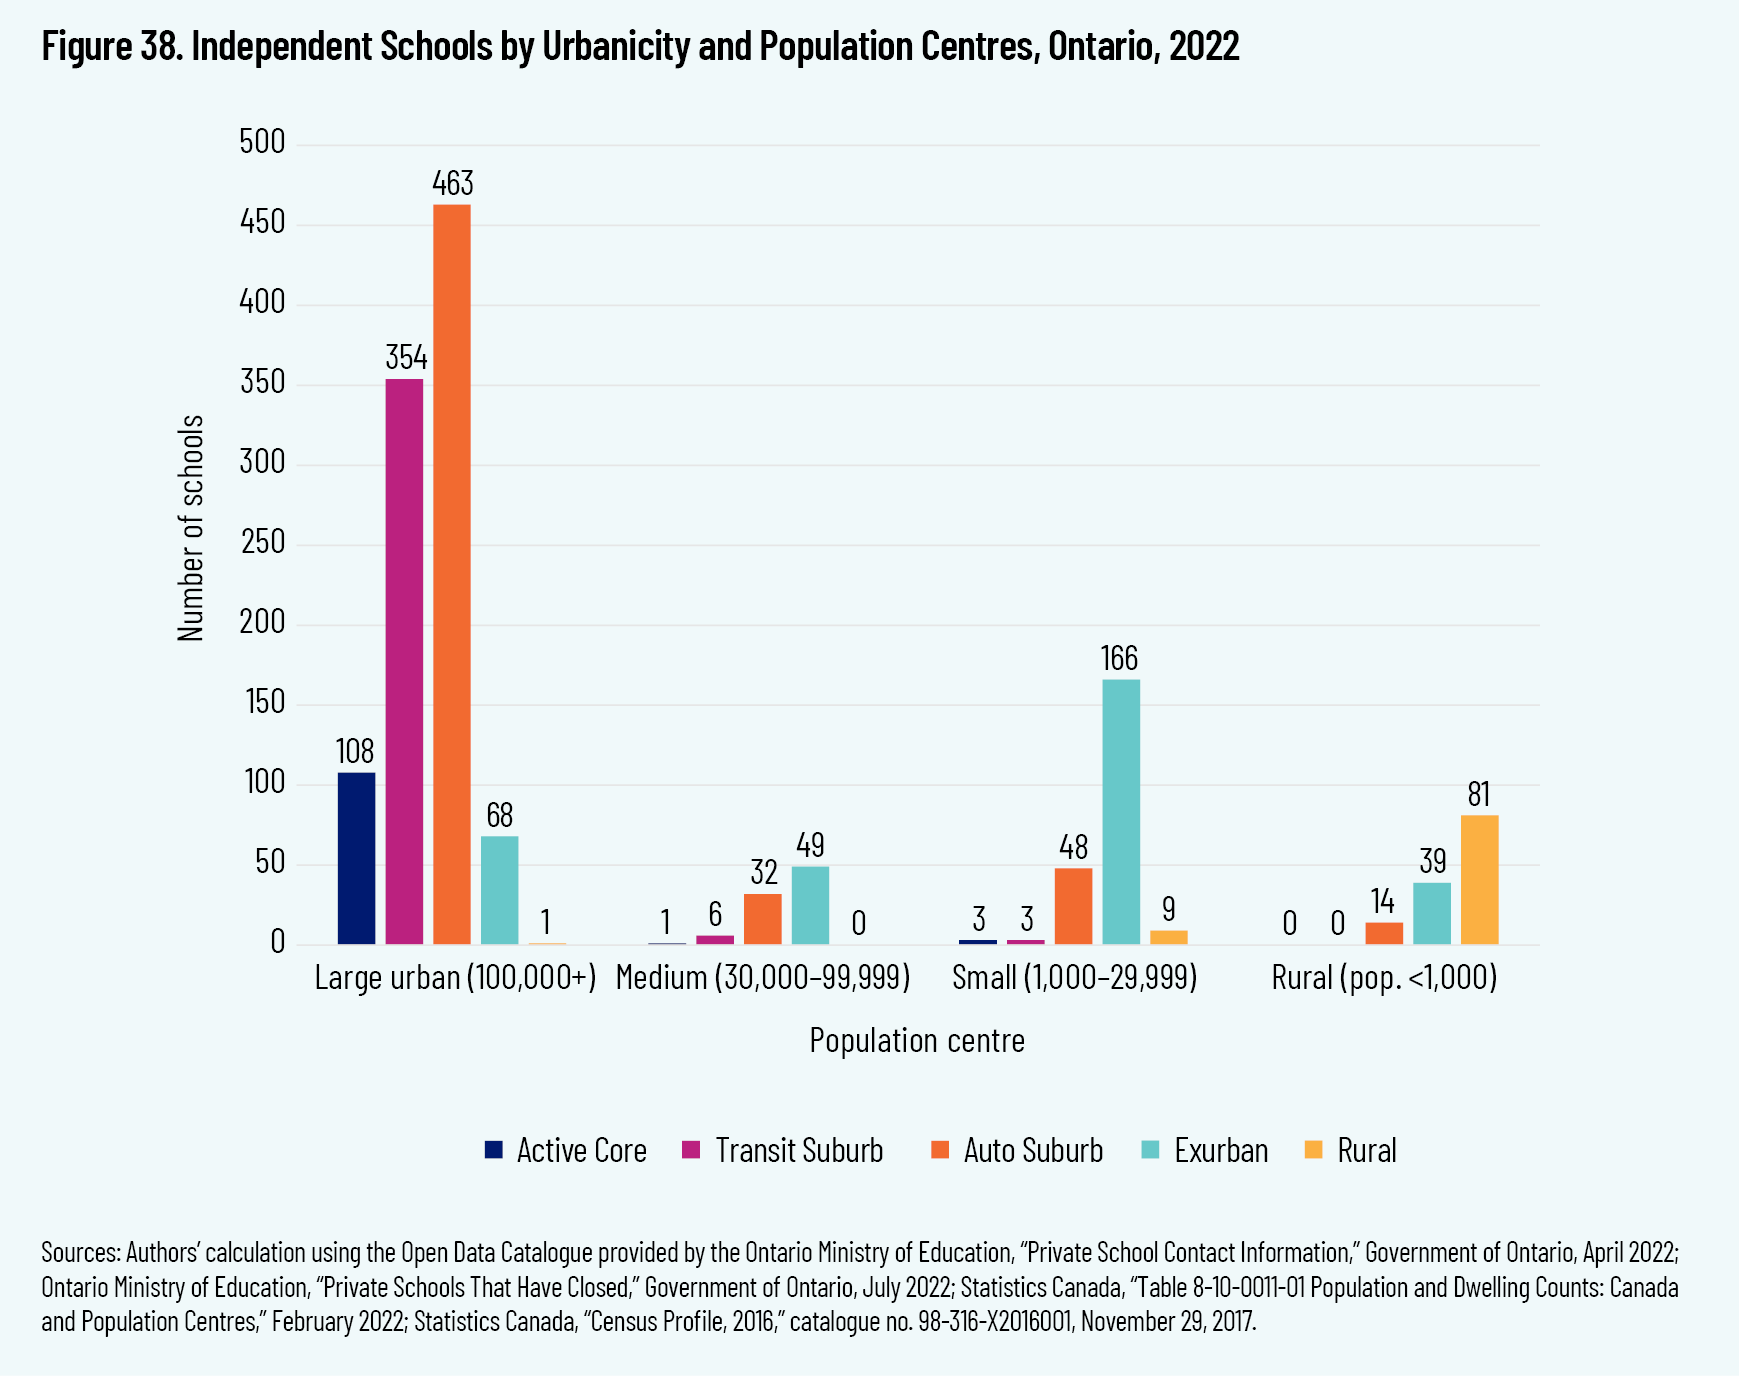 Figure 38. Independent School by Urbanicity and Population, Ontario, 2022